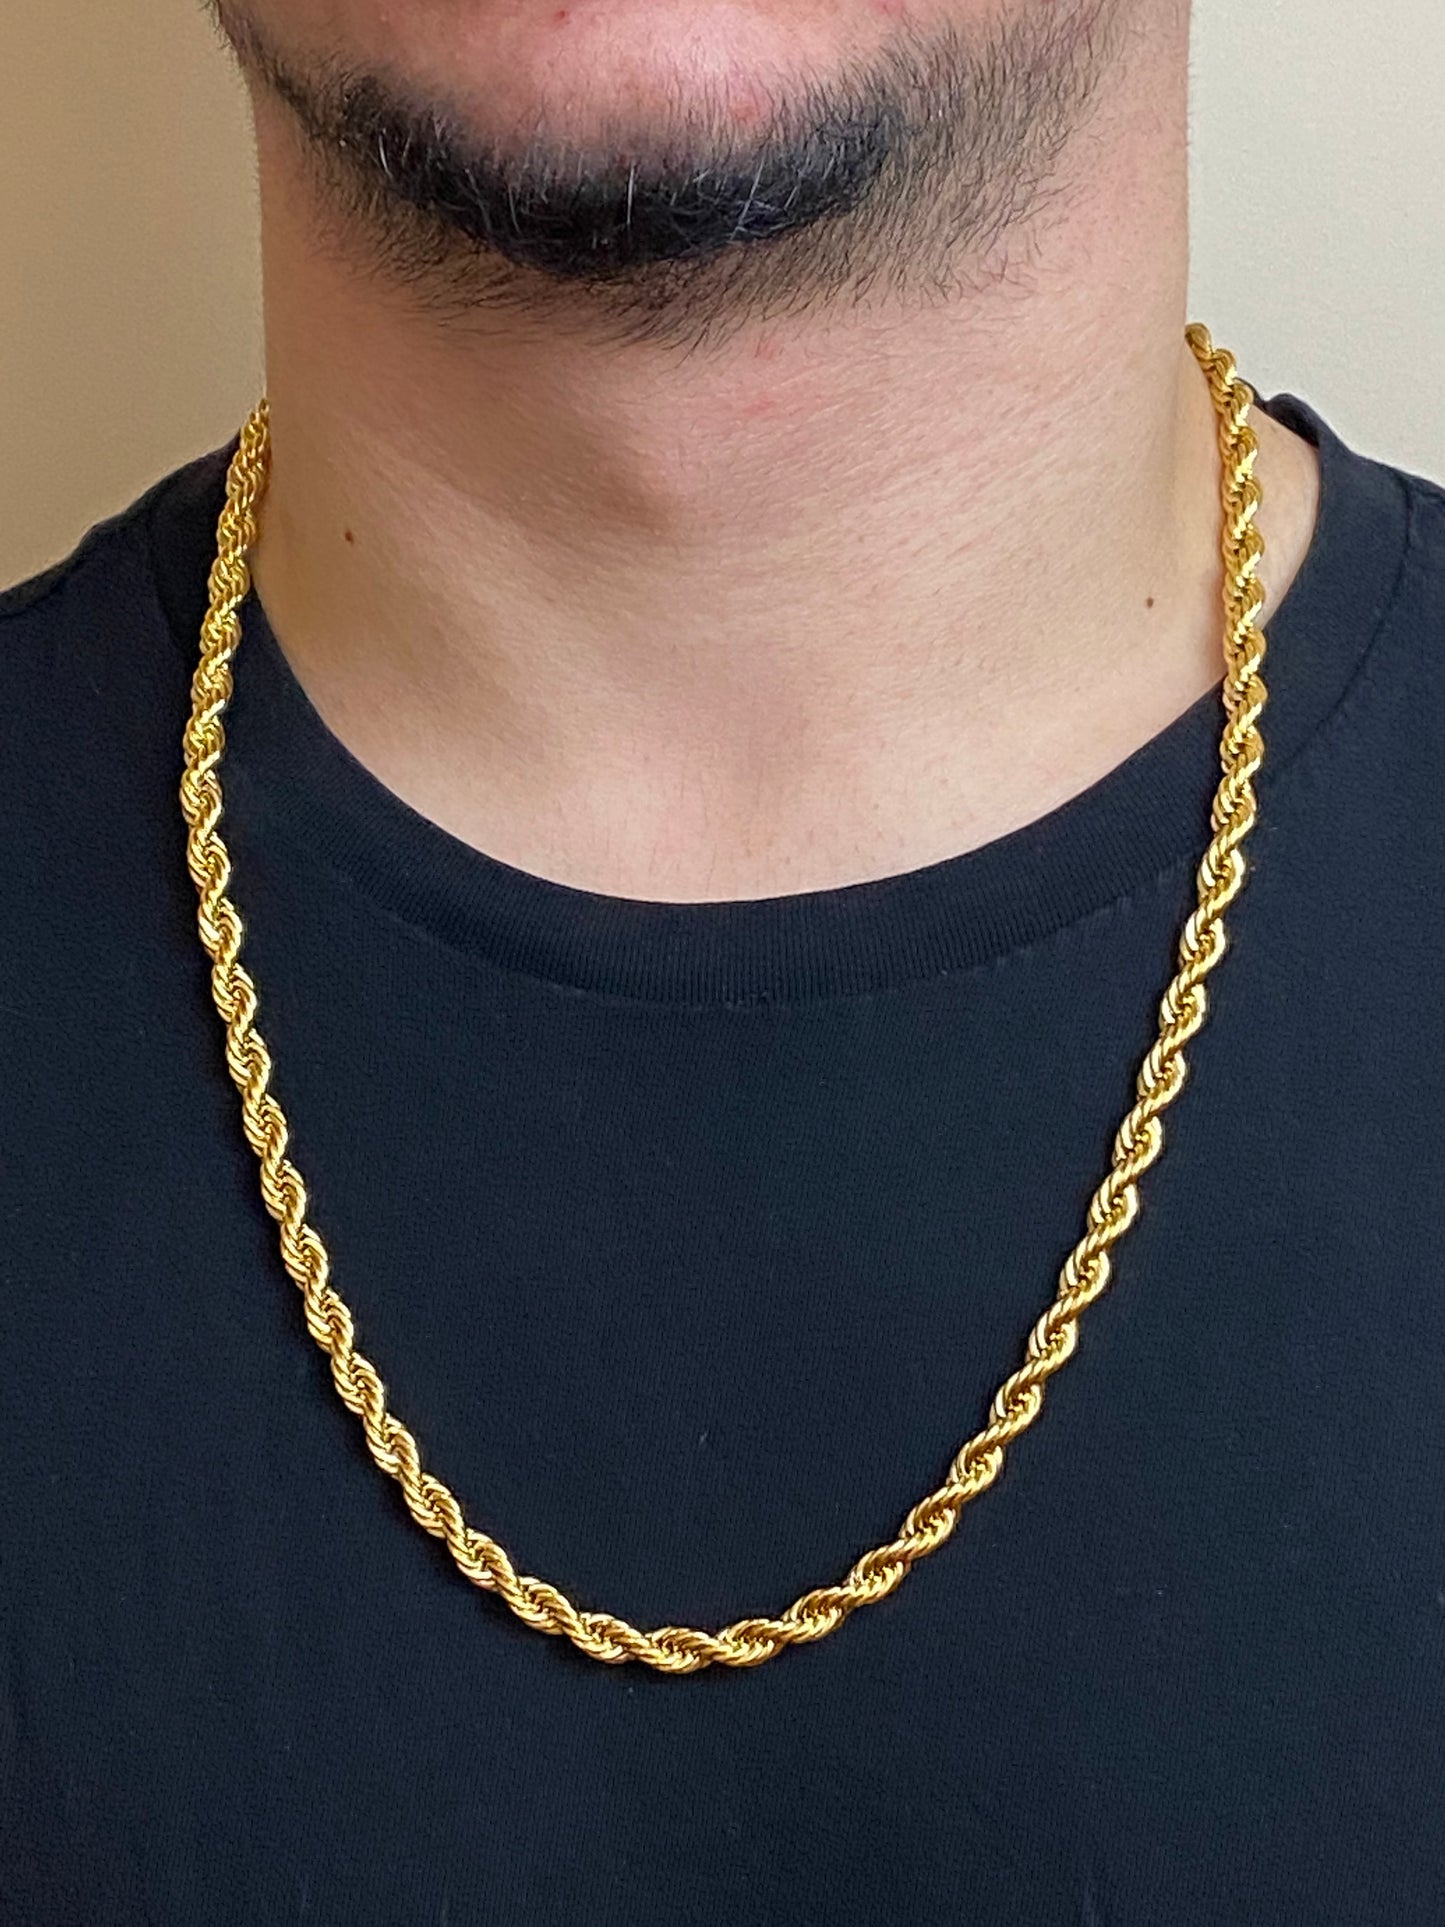 6MM Rope Chain + Bracelet - Yellow Gold